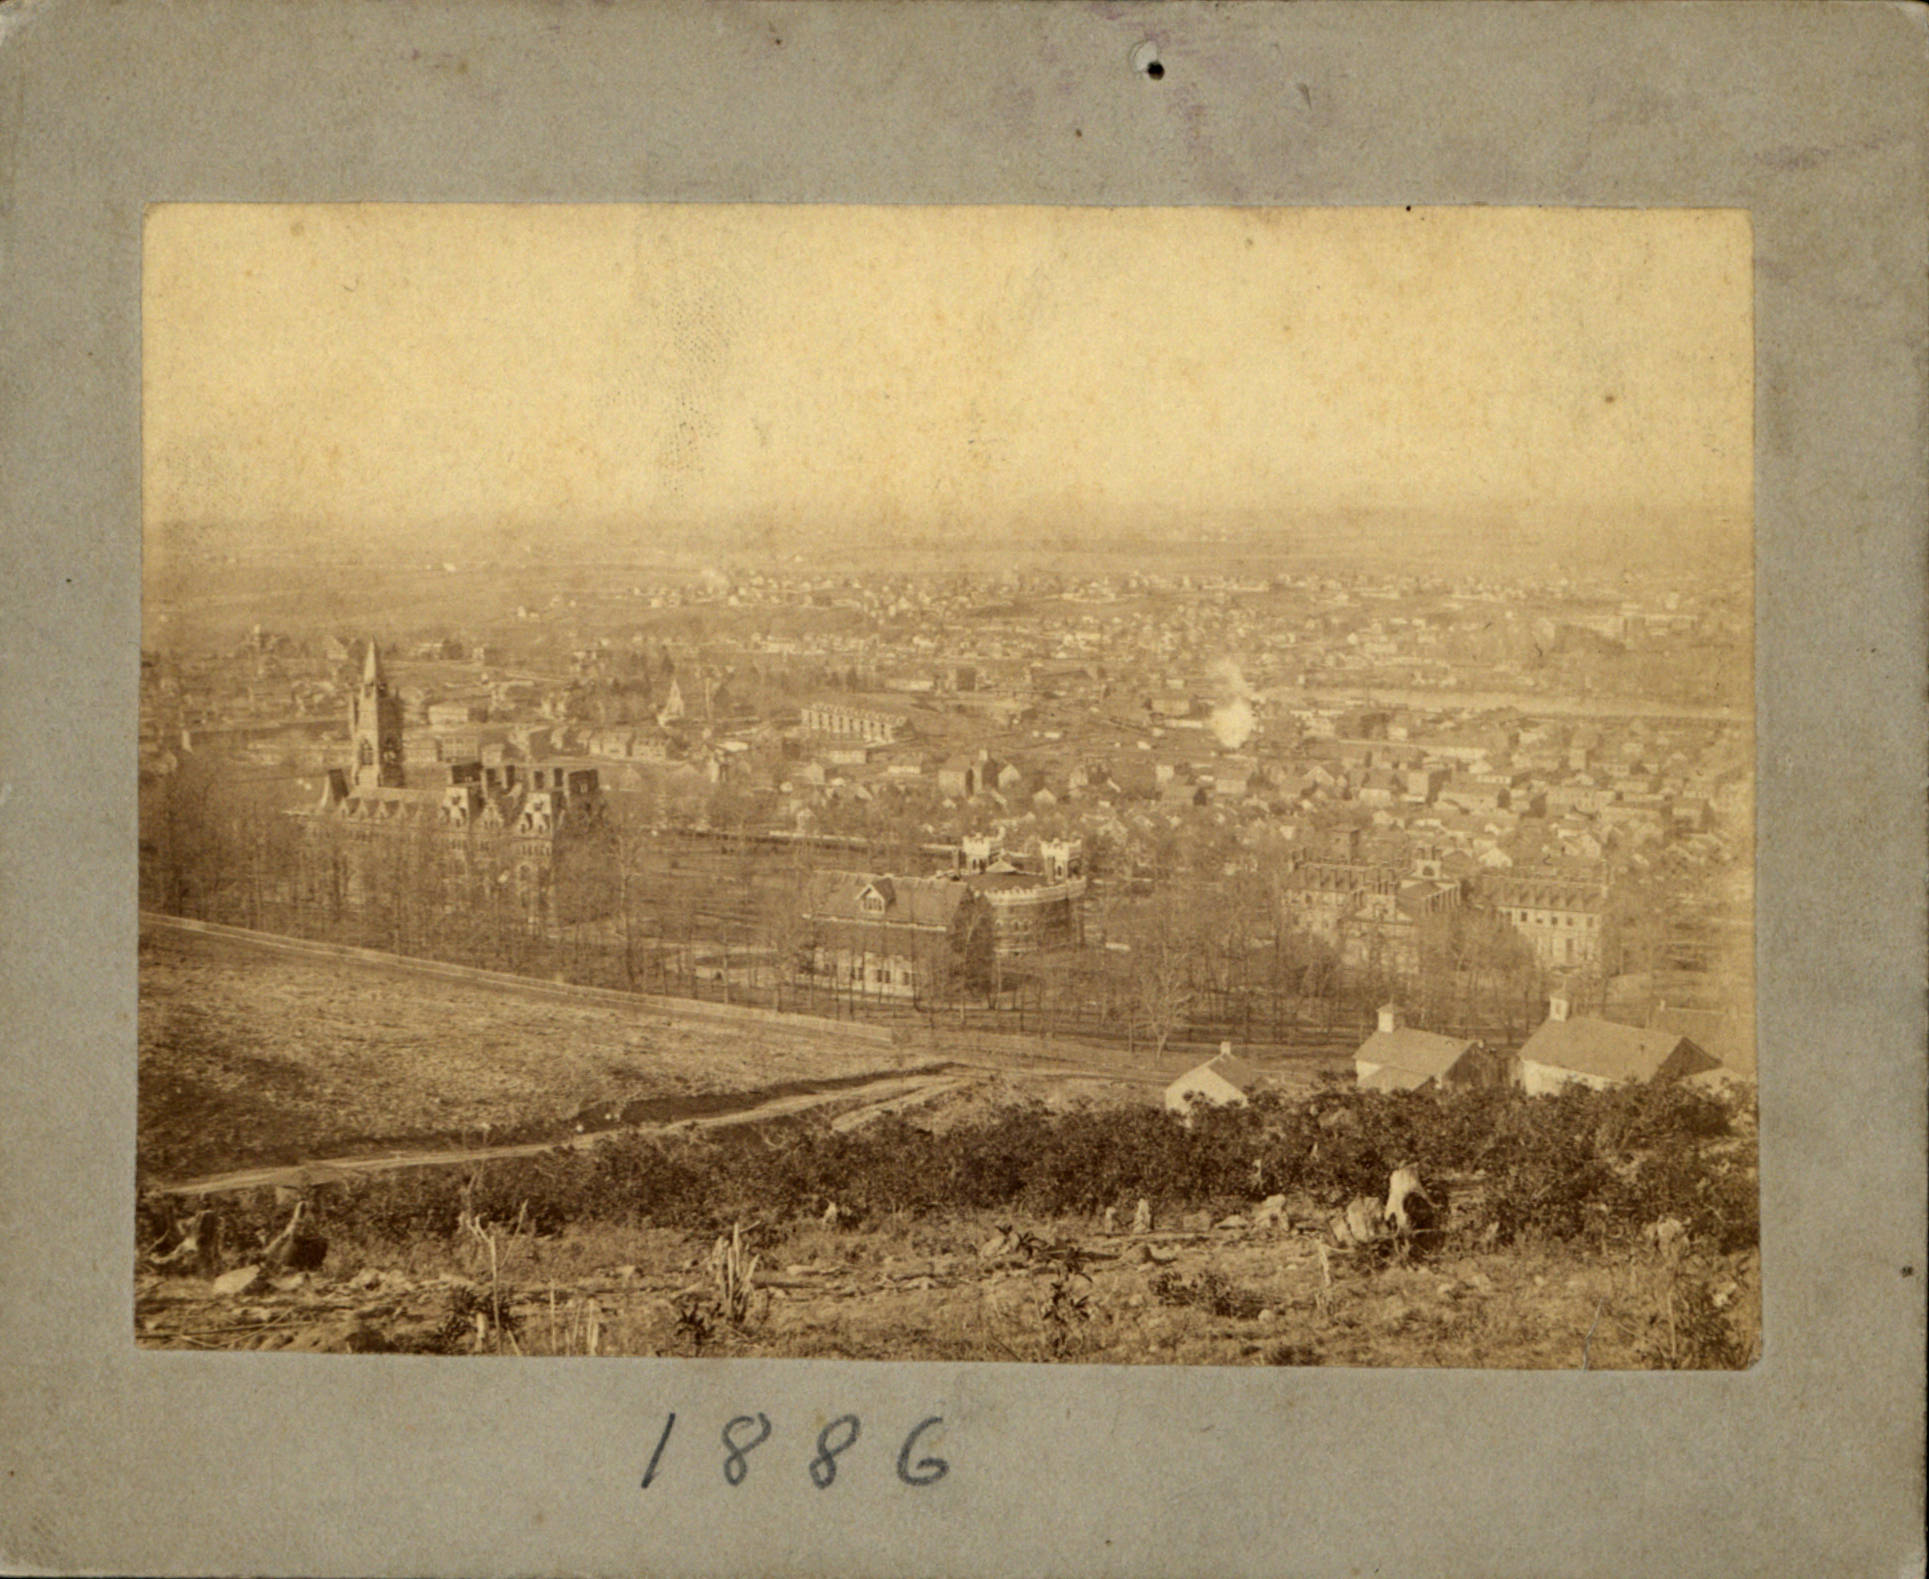 Aerial view of campus from 1886